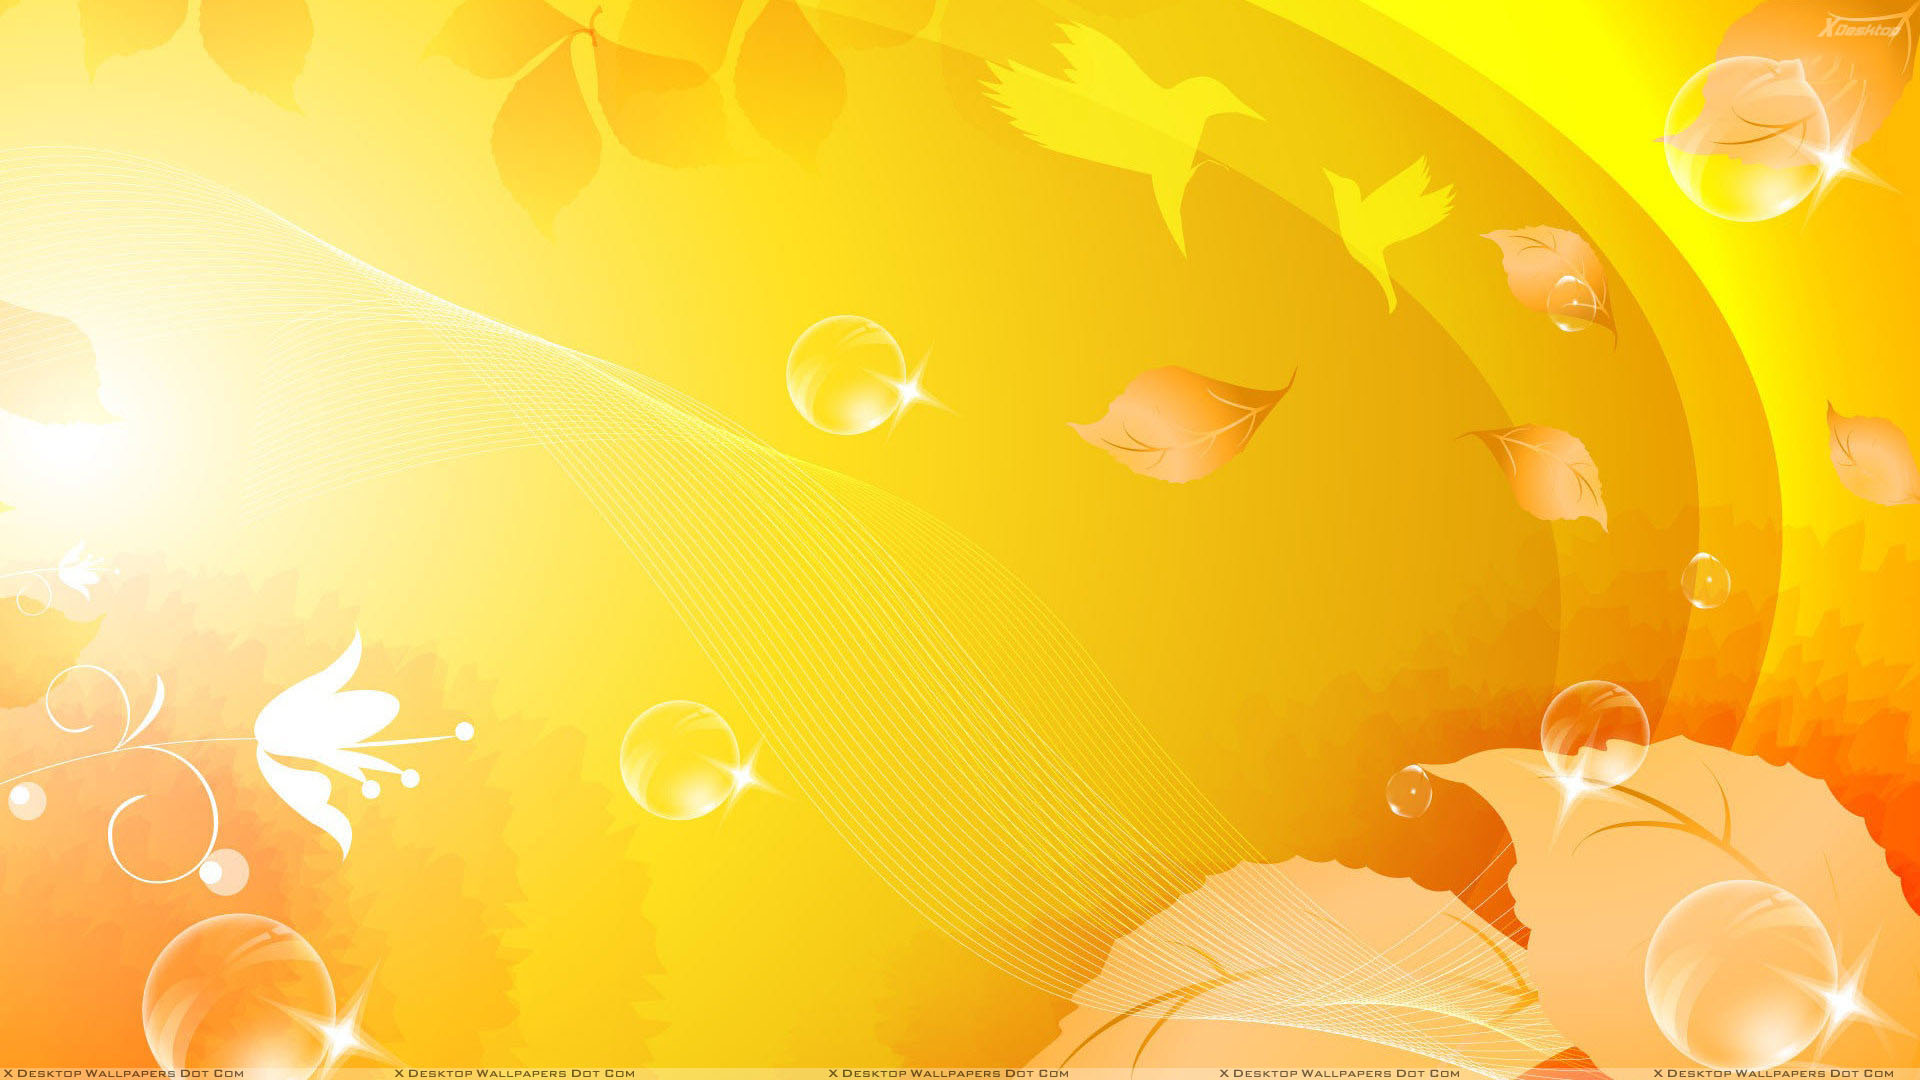 48 High Definition Yellow Wallpapers/Backgrounds For Free Download